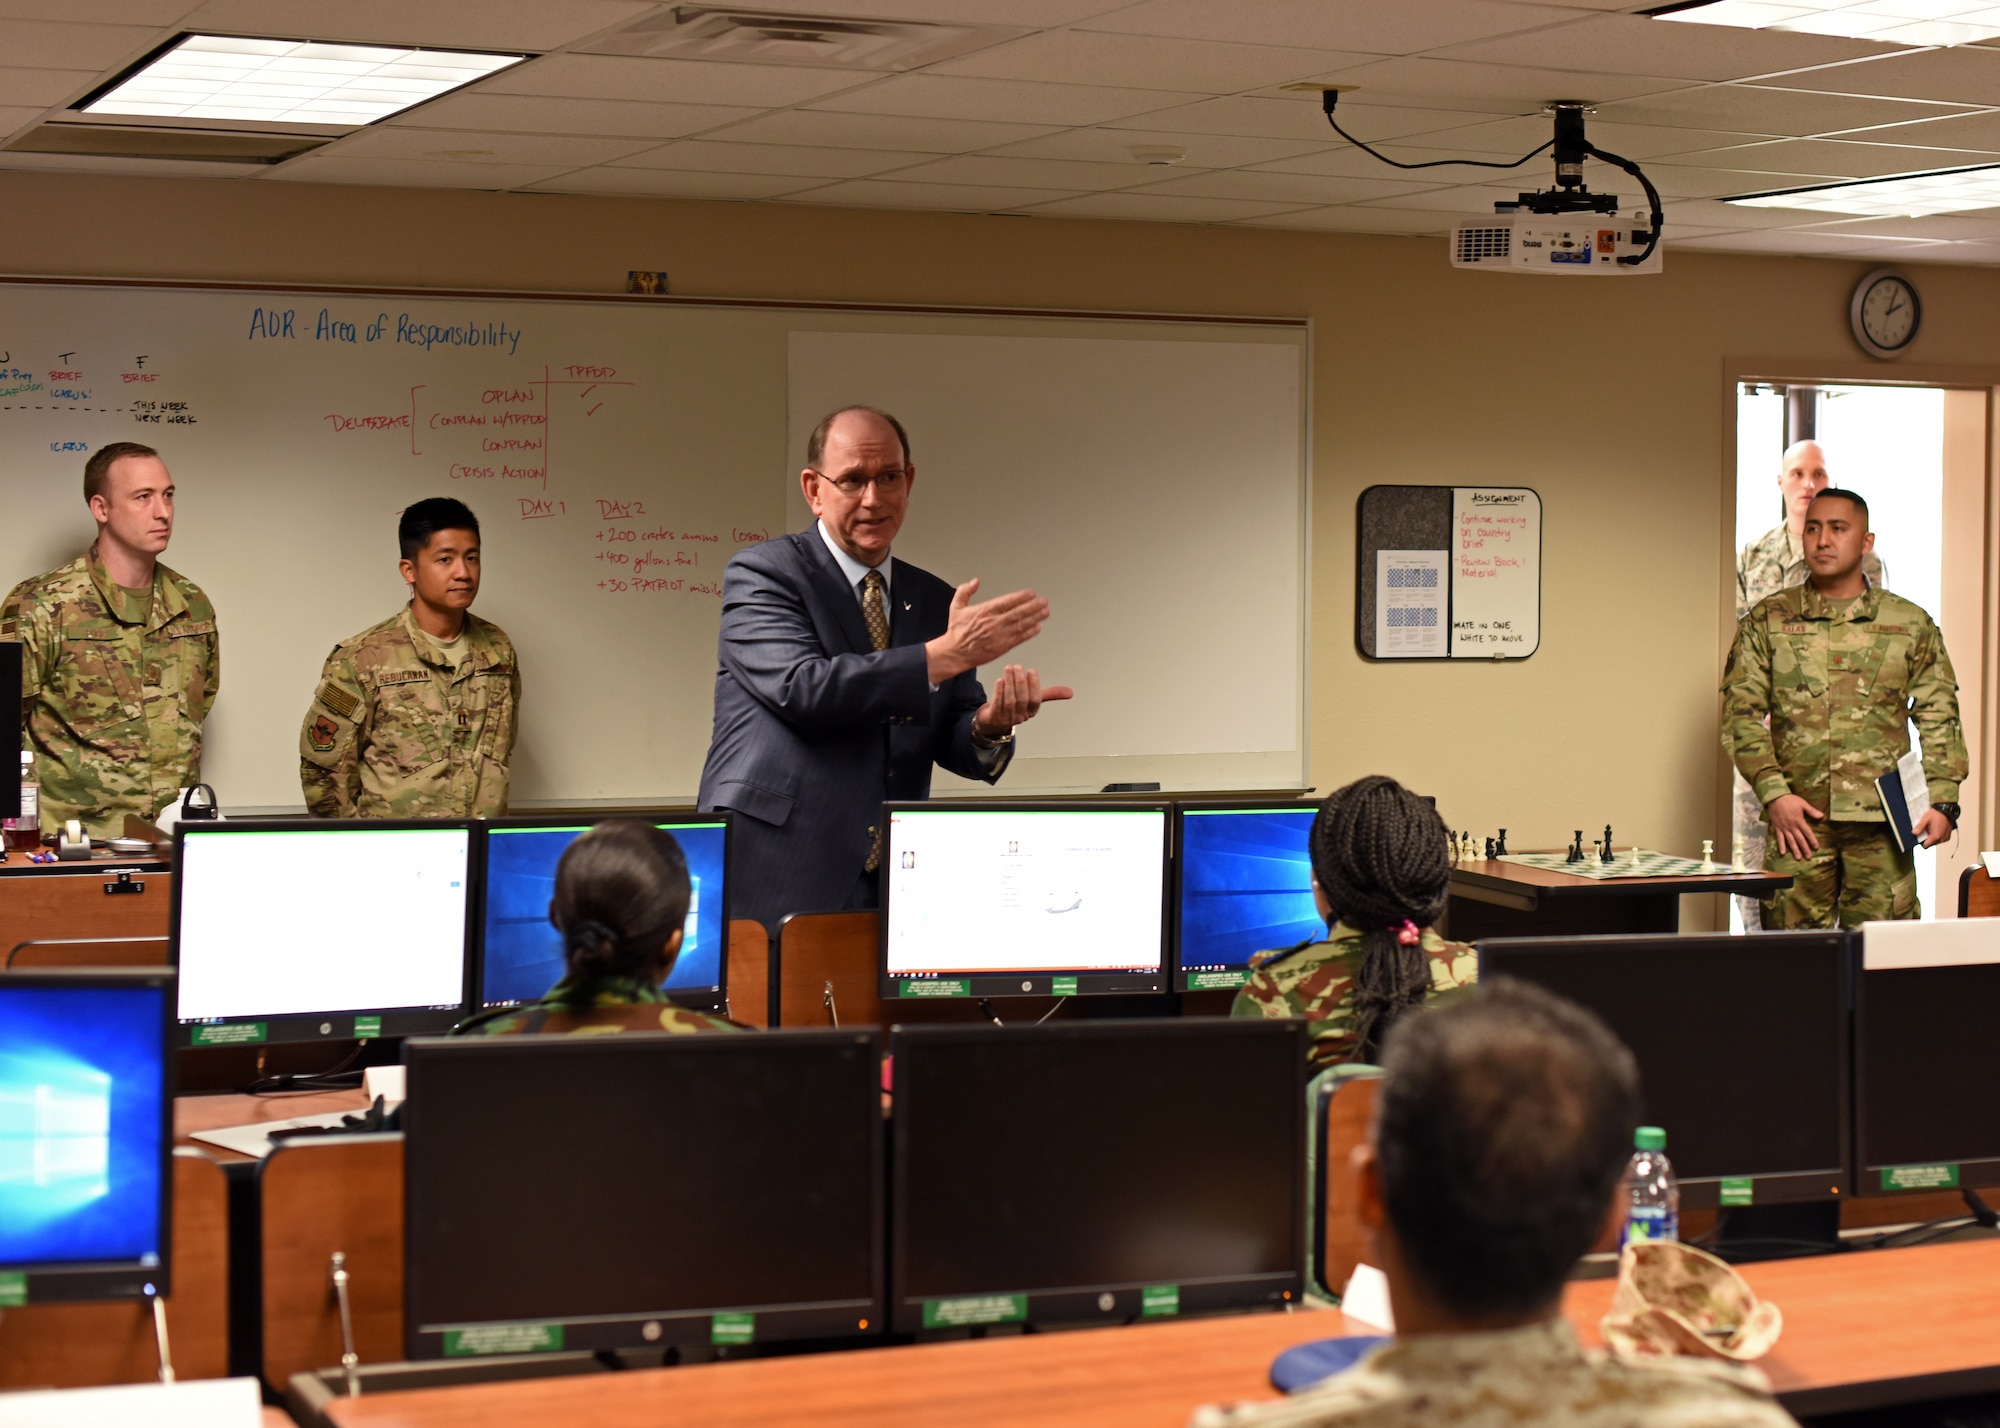 Under Secretary of the Air Force Matthew P. Donovan speaks to International Intelligence Applications Officers during his tour of Goodfellow Air Force Base, Texas, Feb. 13, 2019. The Air Force trains with our allies to build key relationships and share knowledge. (U.S. Air Force photo by Airman 1st Class Zachary Chapman/Released)